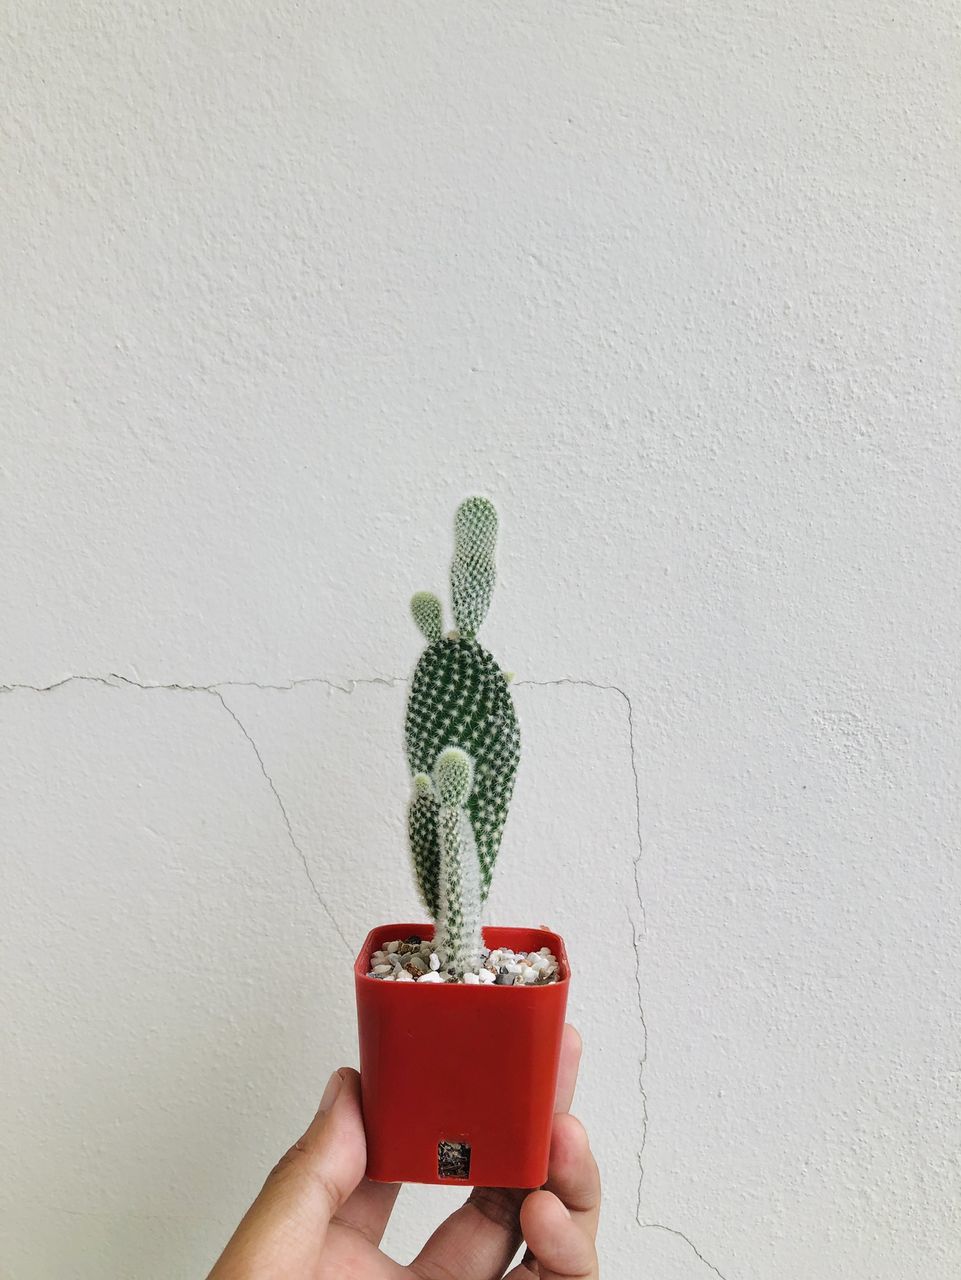 PERSON HOLDING RED POTTED PLANT AGAINST WALL